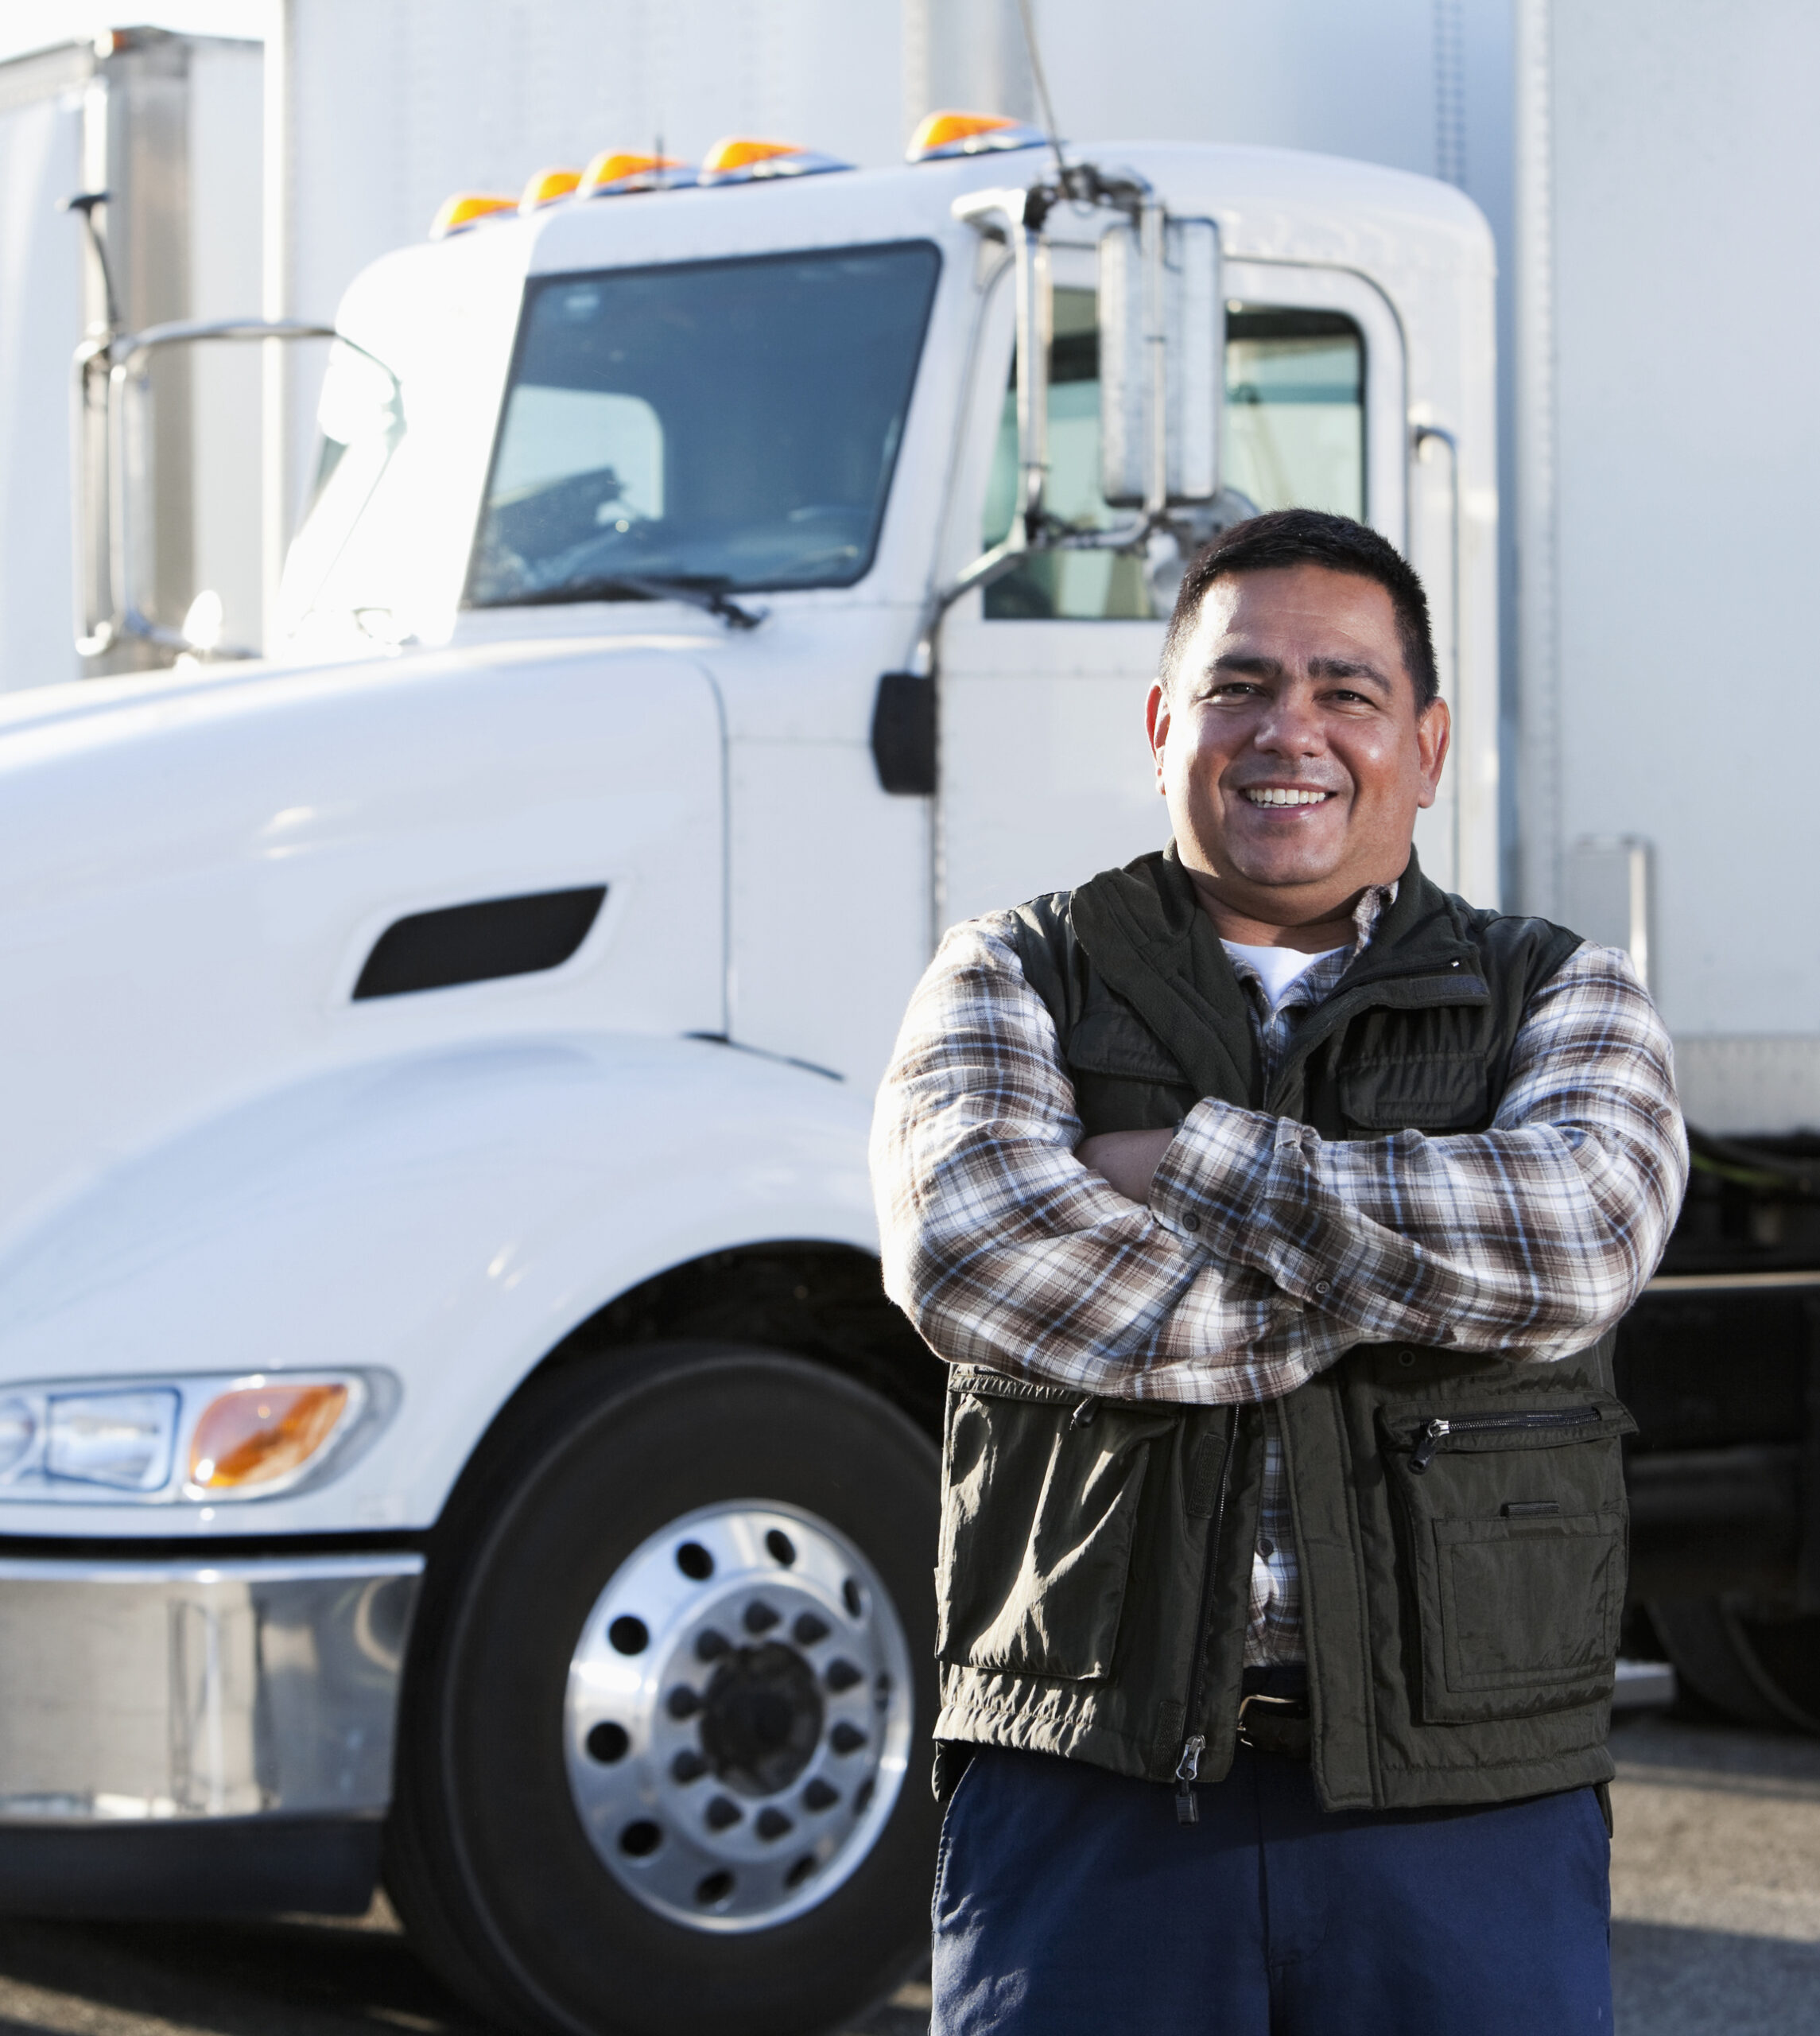 Latino man smiles proudly in front of semitruck